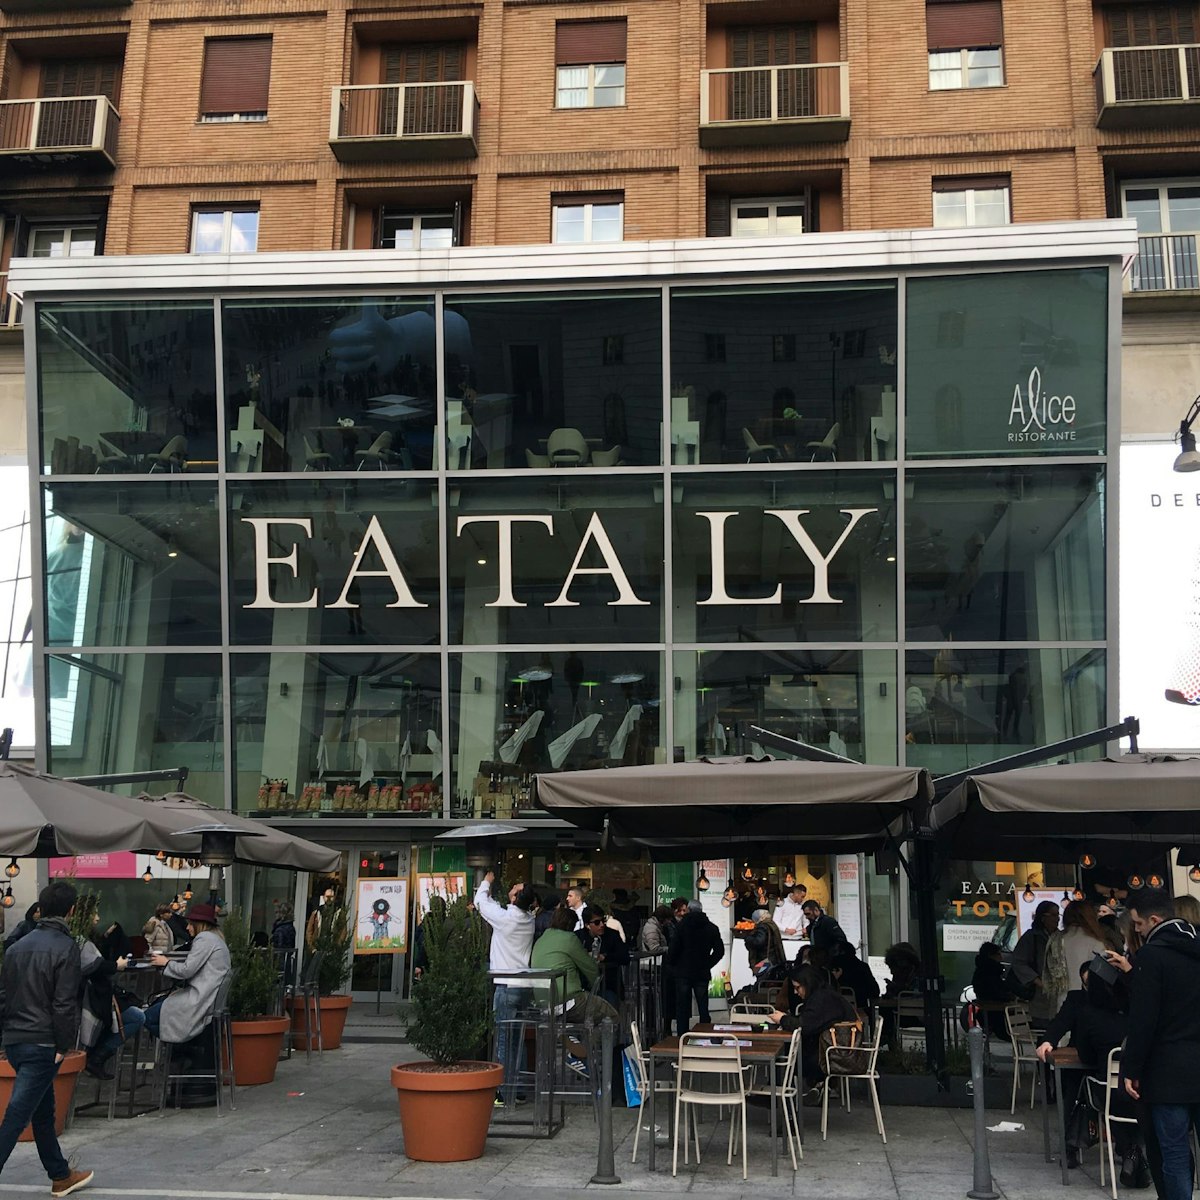 The Eataly shop front